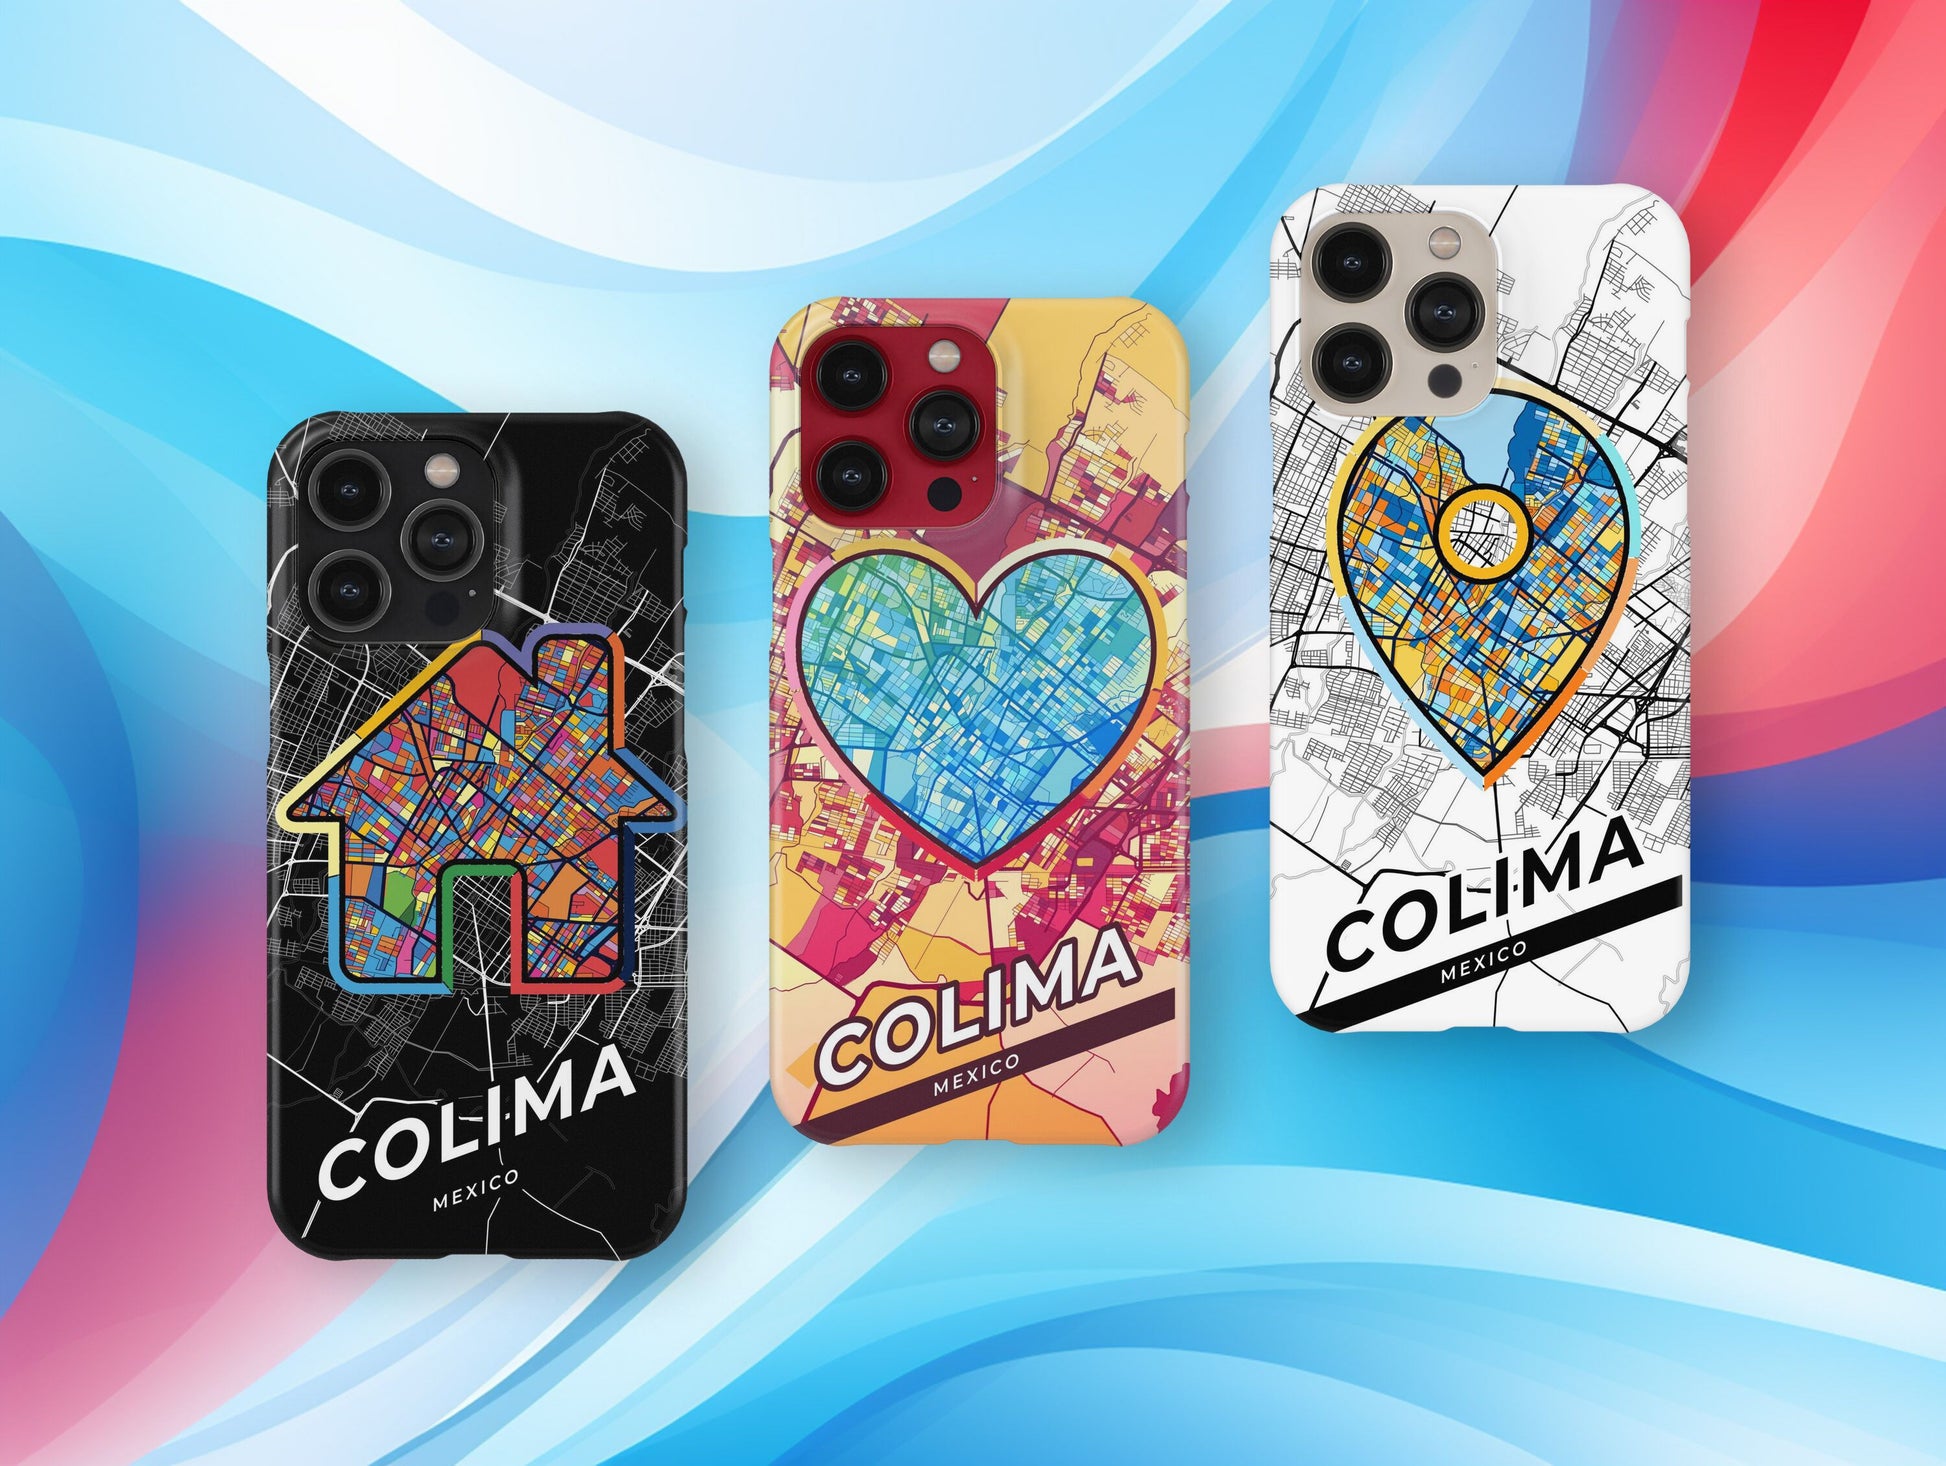 Colima Mexico slim phone case with colorful icon. Birthday, wedding or housewarming gift. Couple match cases.